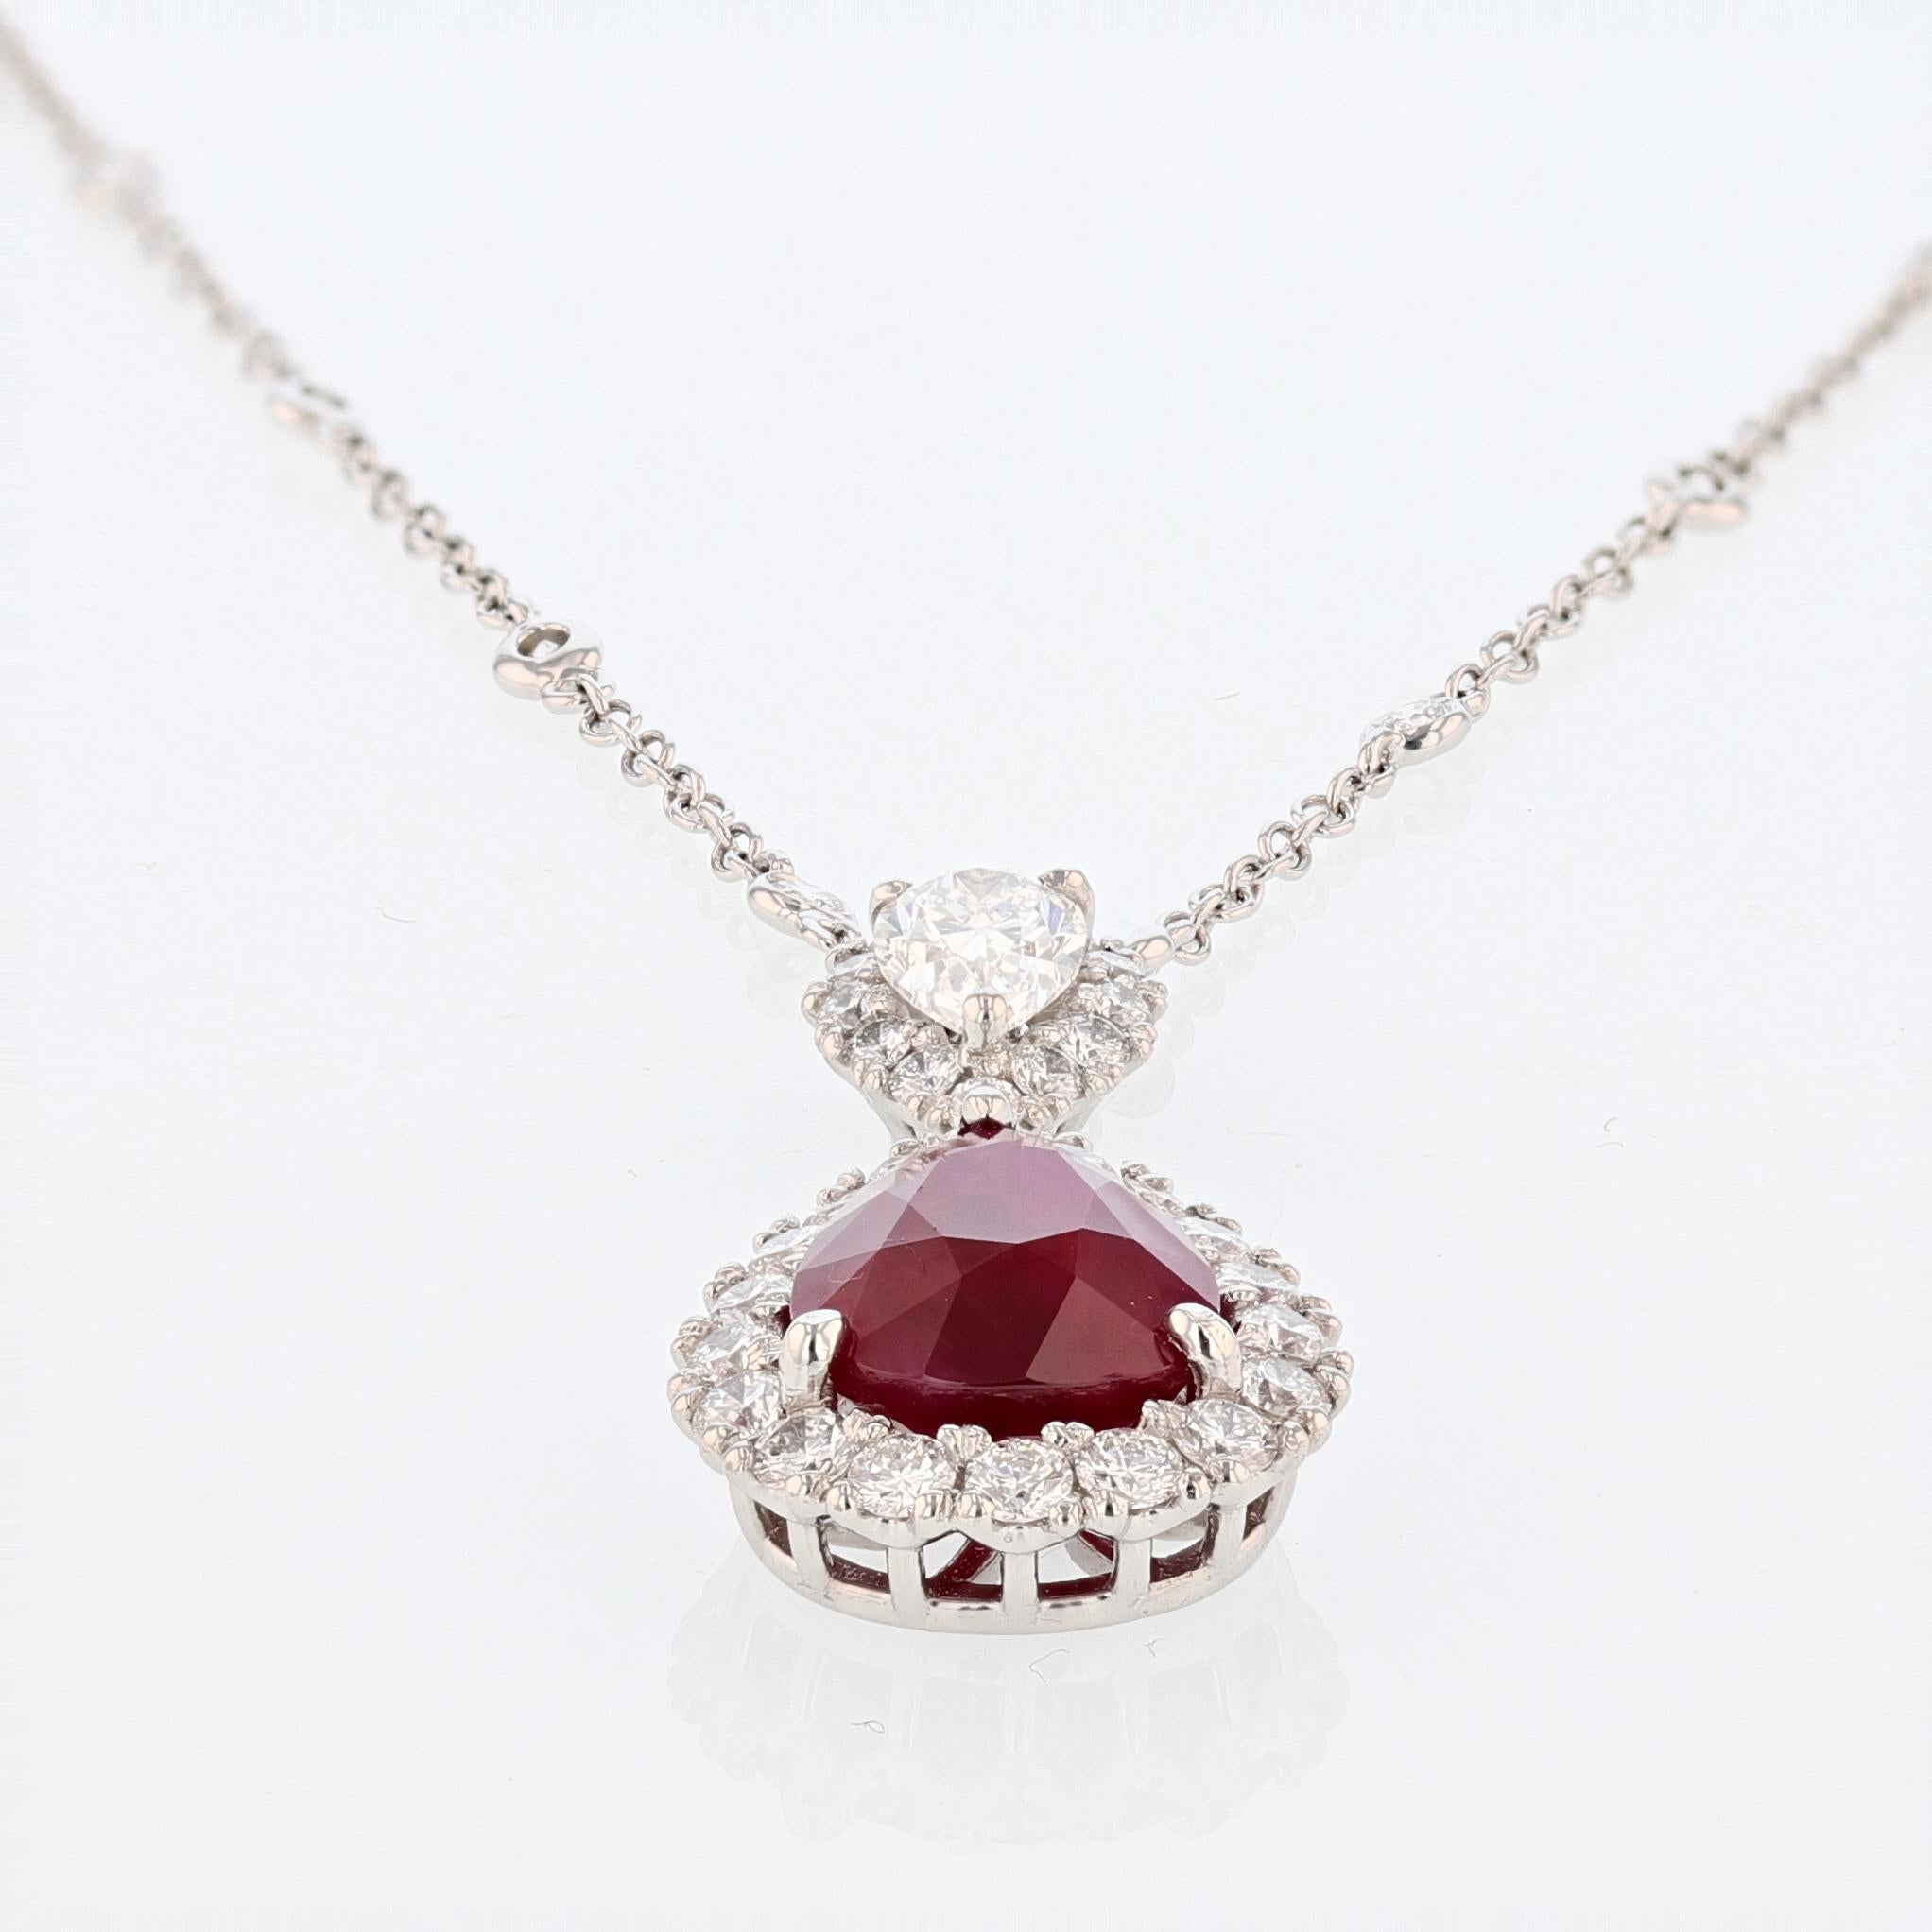 This pendant is made in platinum featuring one pear shape GRS certified Burmese Ruby weighing 6.21ct. The certificate number is GRS2013-022291. There is one 0.70ct pear shape diamond set on the bail with EGL certificate color grade (D) clarity grade